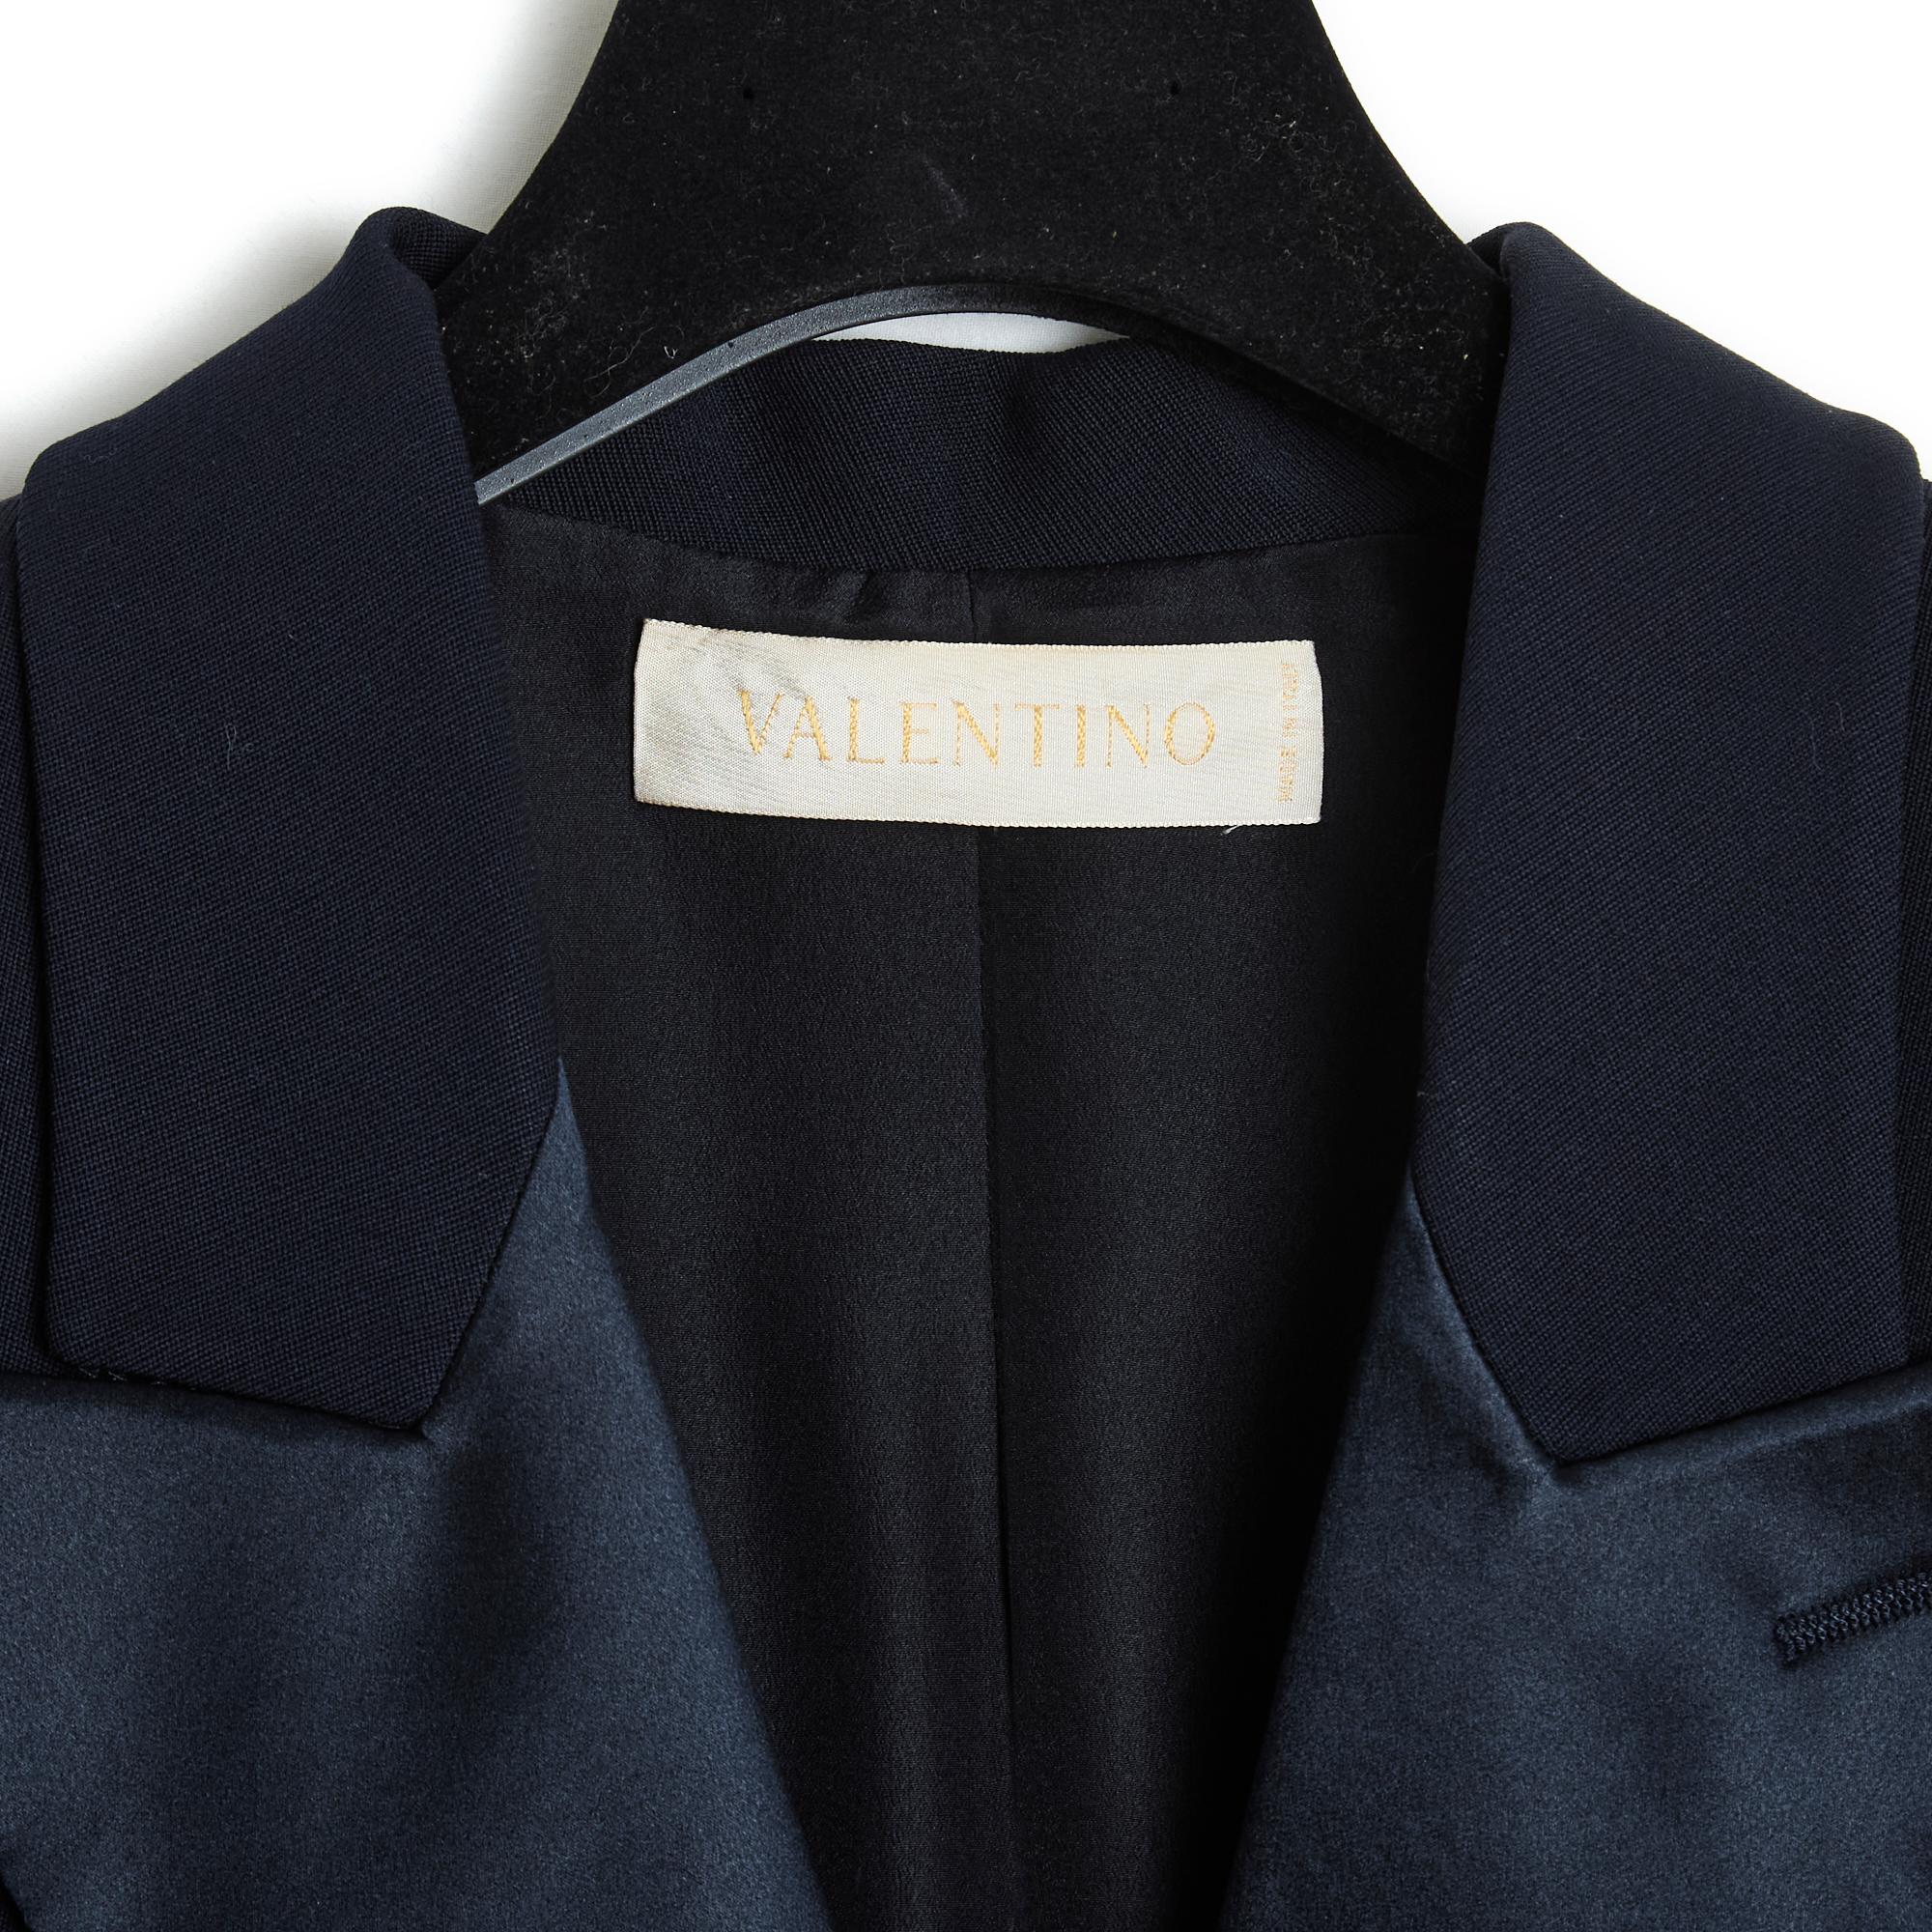 Valentino jacket, tuxedo-style trouser suit, in navy blue wool crepe and coordinated silk satin, jacket with notched collar with satin lapels, crossed belt in front with 2 buttons, 2 slit pockets on the hips, long sleeves closed with 2 buttons,